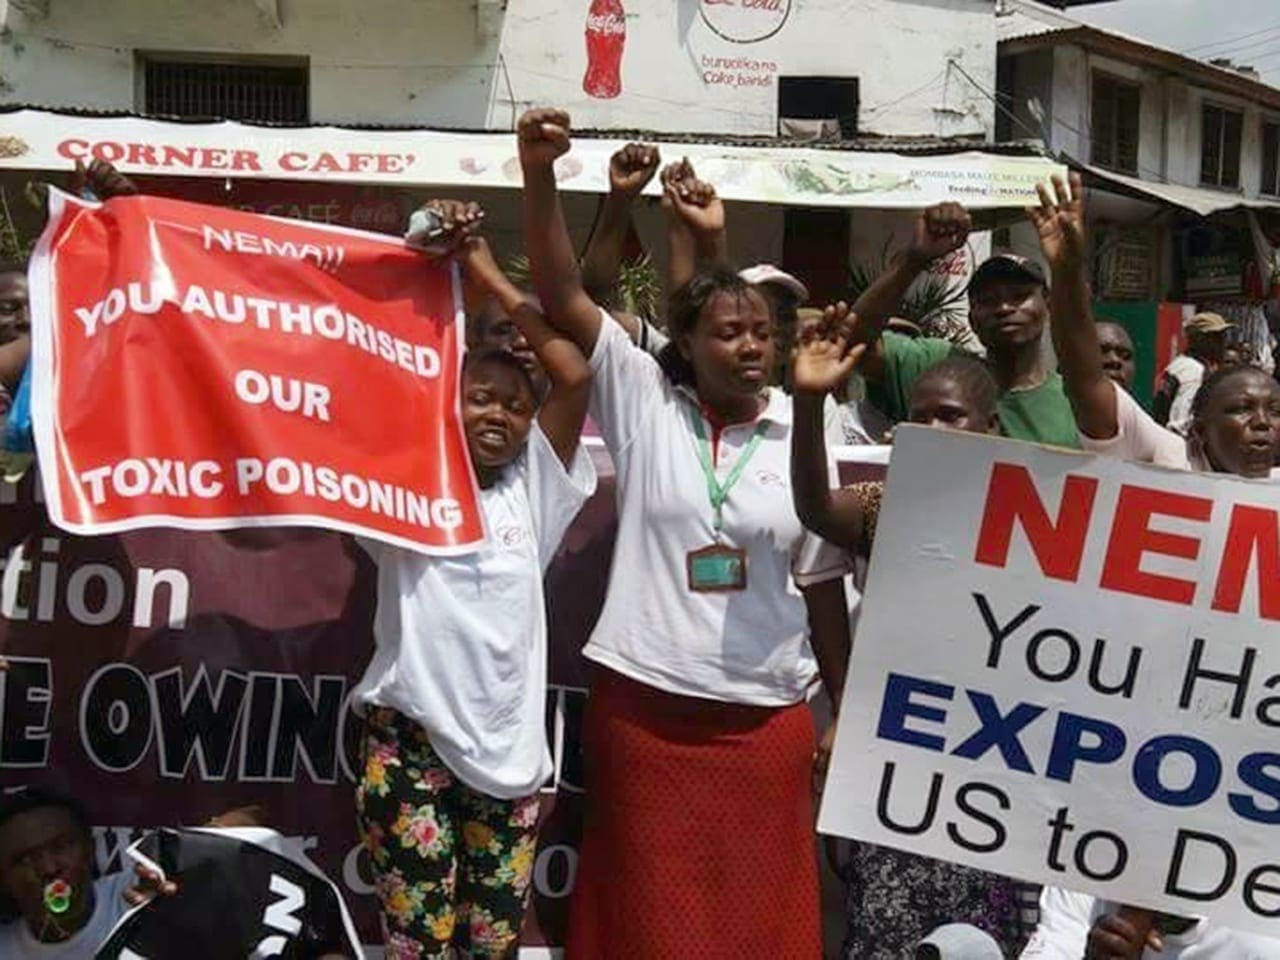 Phyllis Omido stands with her arms in the air while surrounded by Kenyan protesters.